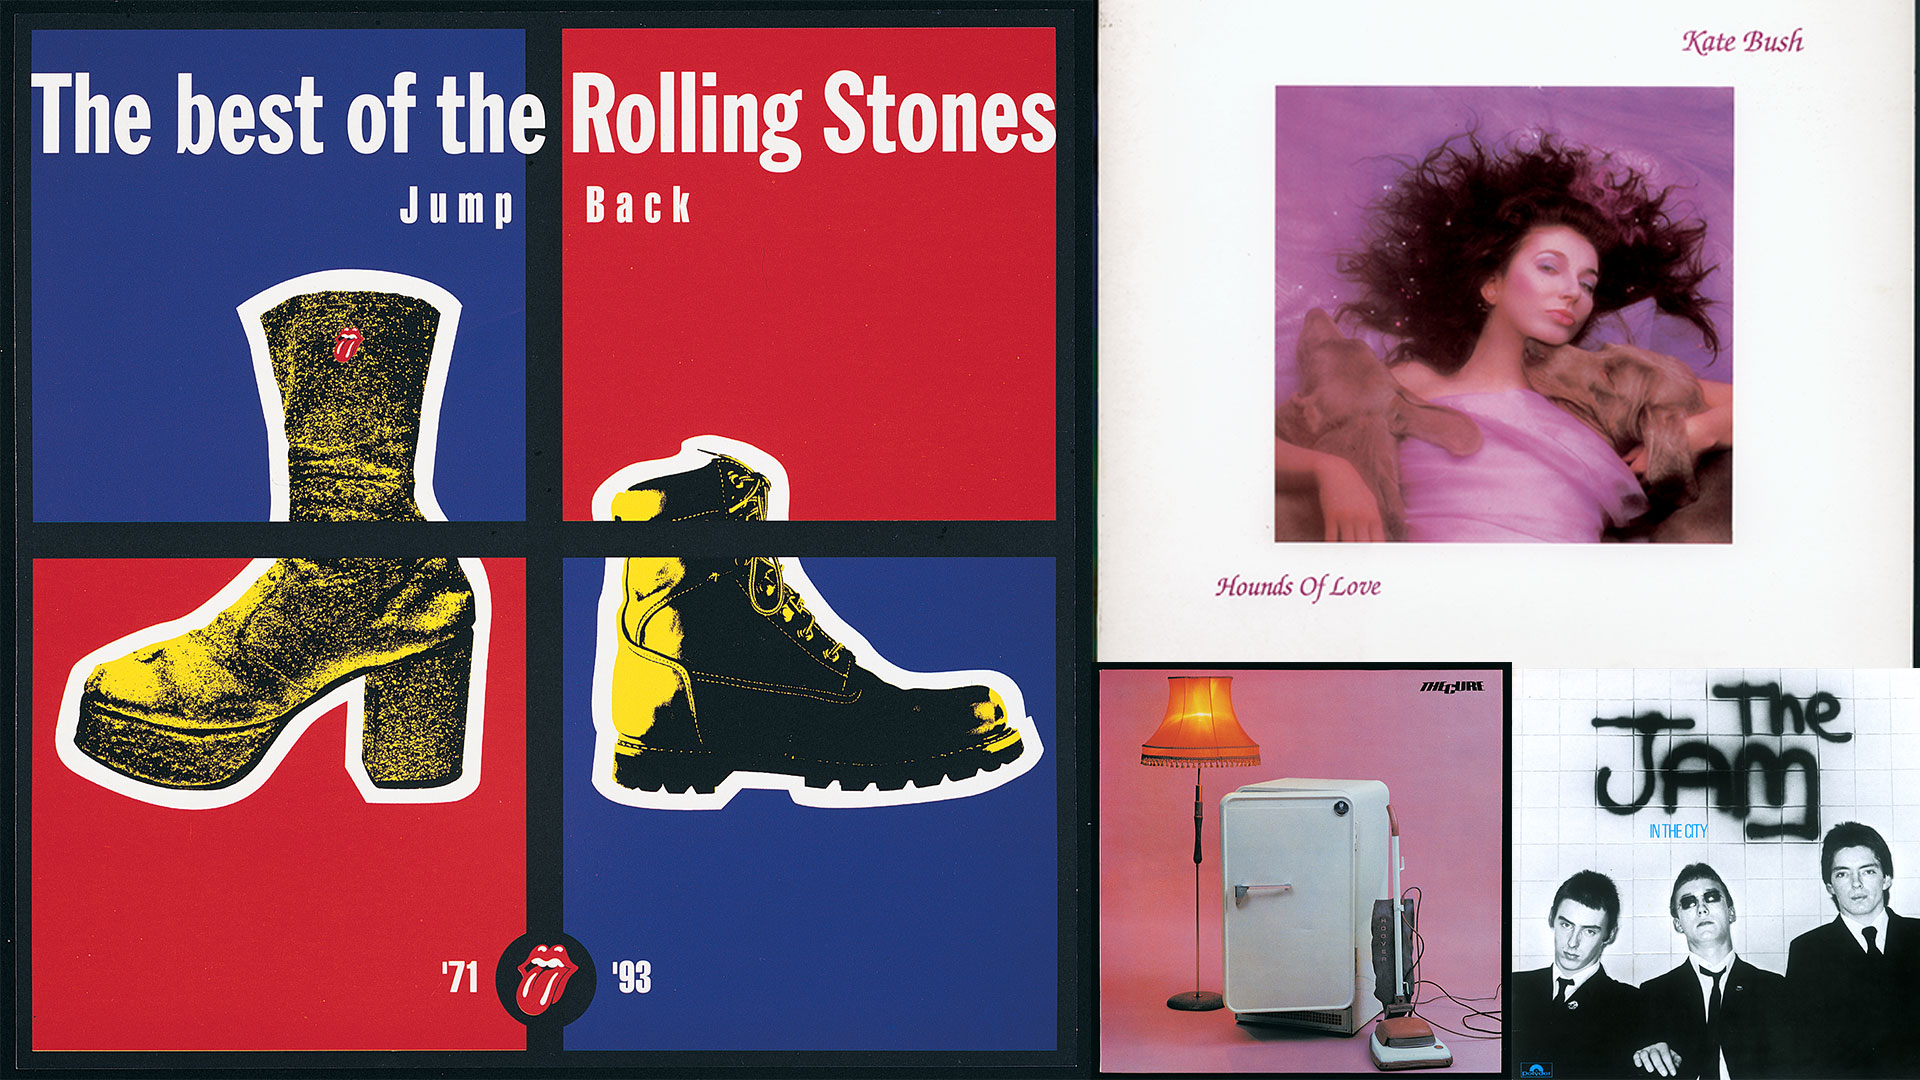 Album cover stories: The Rolling Stones, Kate Bush, The Cure